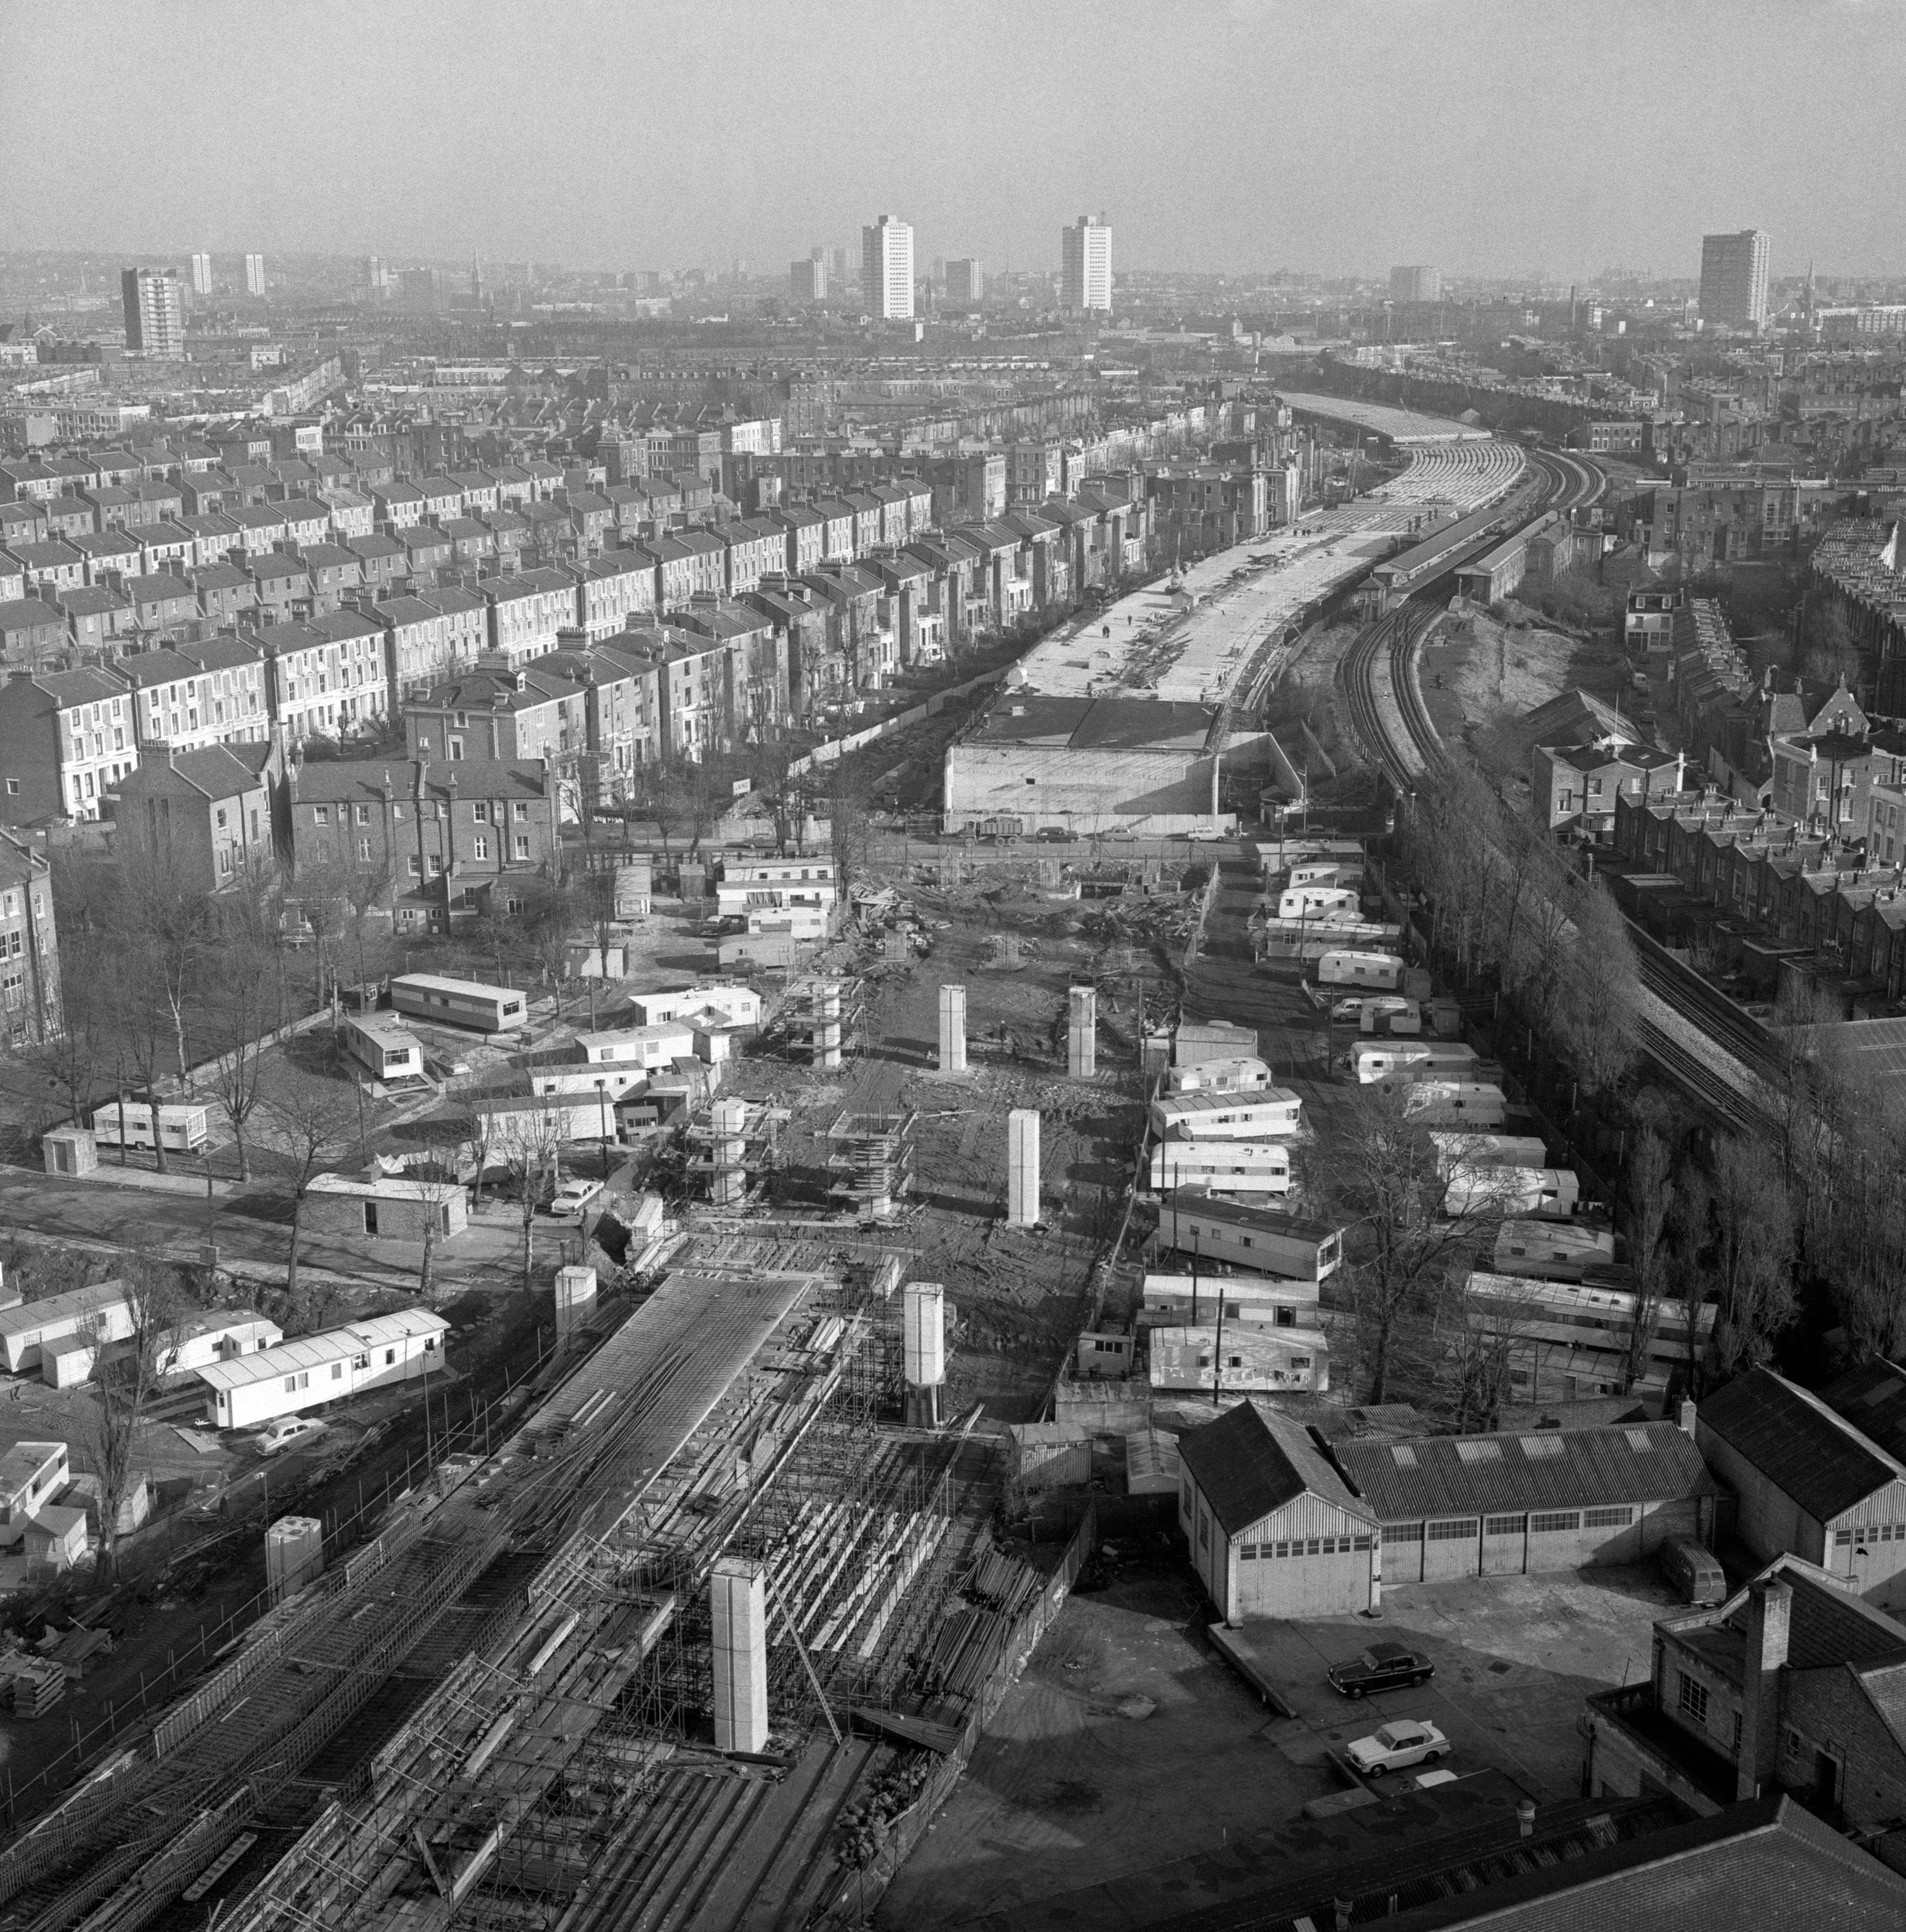 The Westway under construction, a 2.5 mile long elevated dual carriageway section of the A40 route in west London running from Paddington to North Kensington. It was built to relieve congestion at Shepherd's Bush caused by traffic from Western Avenue.